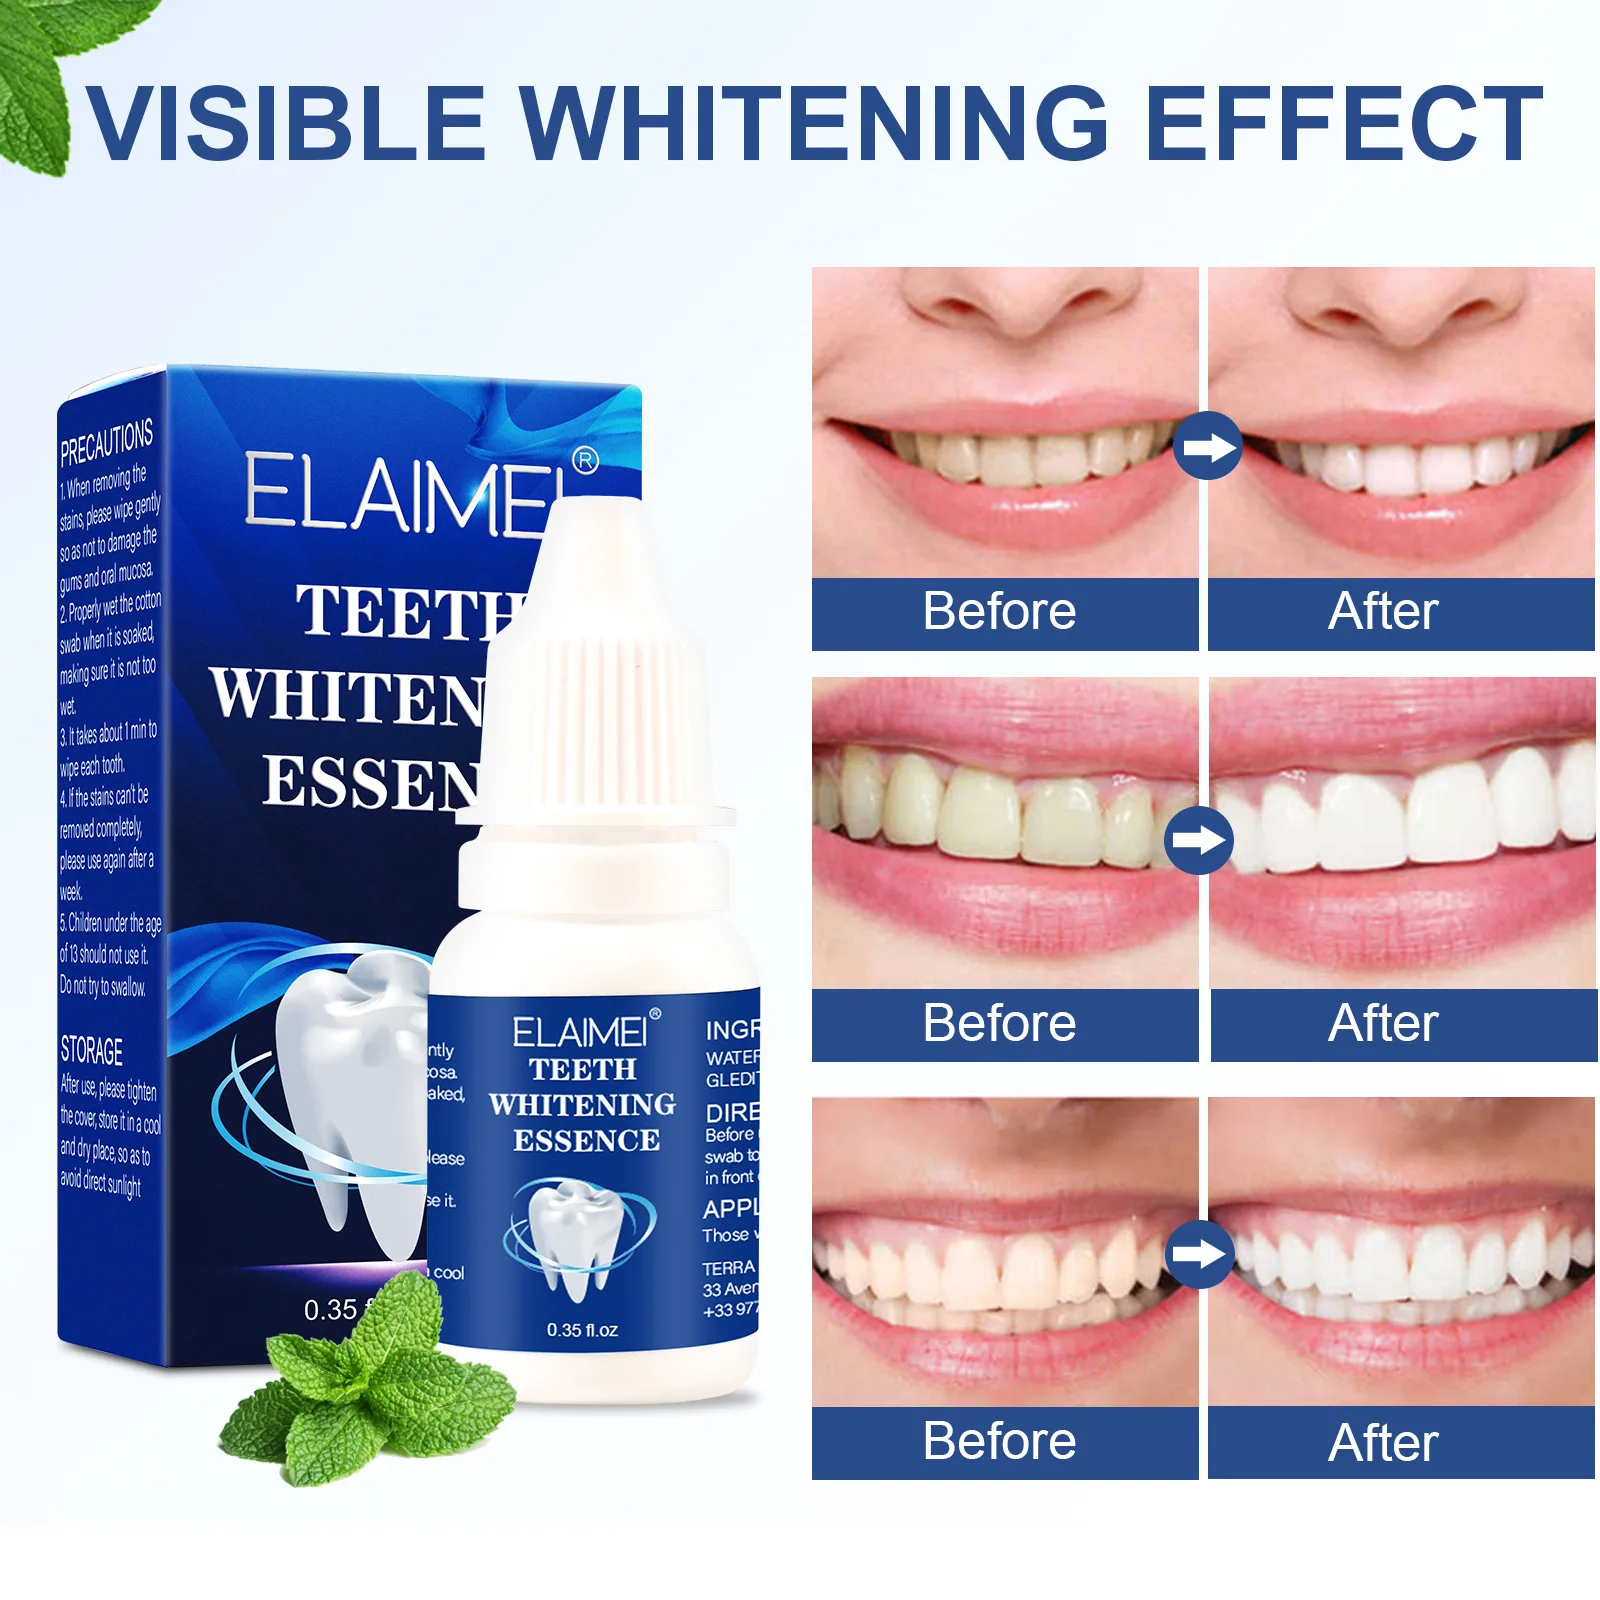 

ELAIMEI Teeth Whitening Essence Powder Oral Hygiene Cleaning Serum Removes Plaque Stains Tooth Bleaching Dental Tools Toothpaste